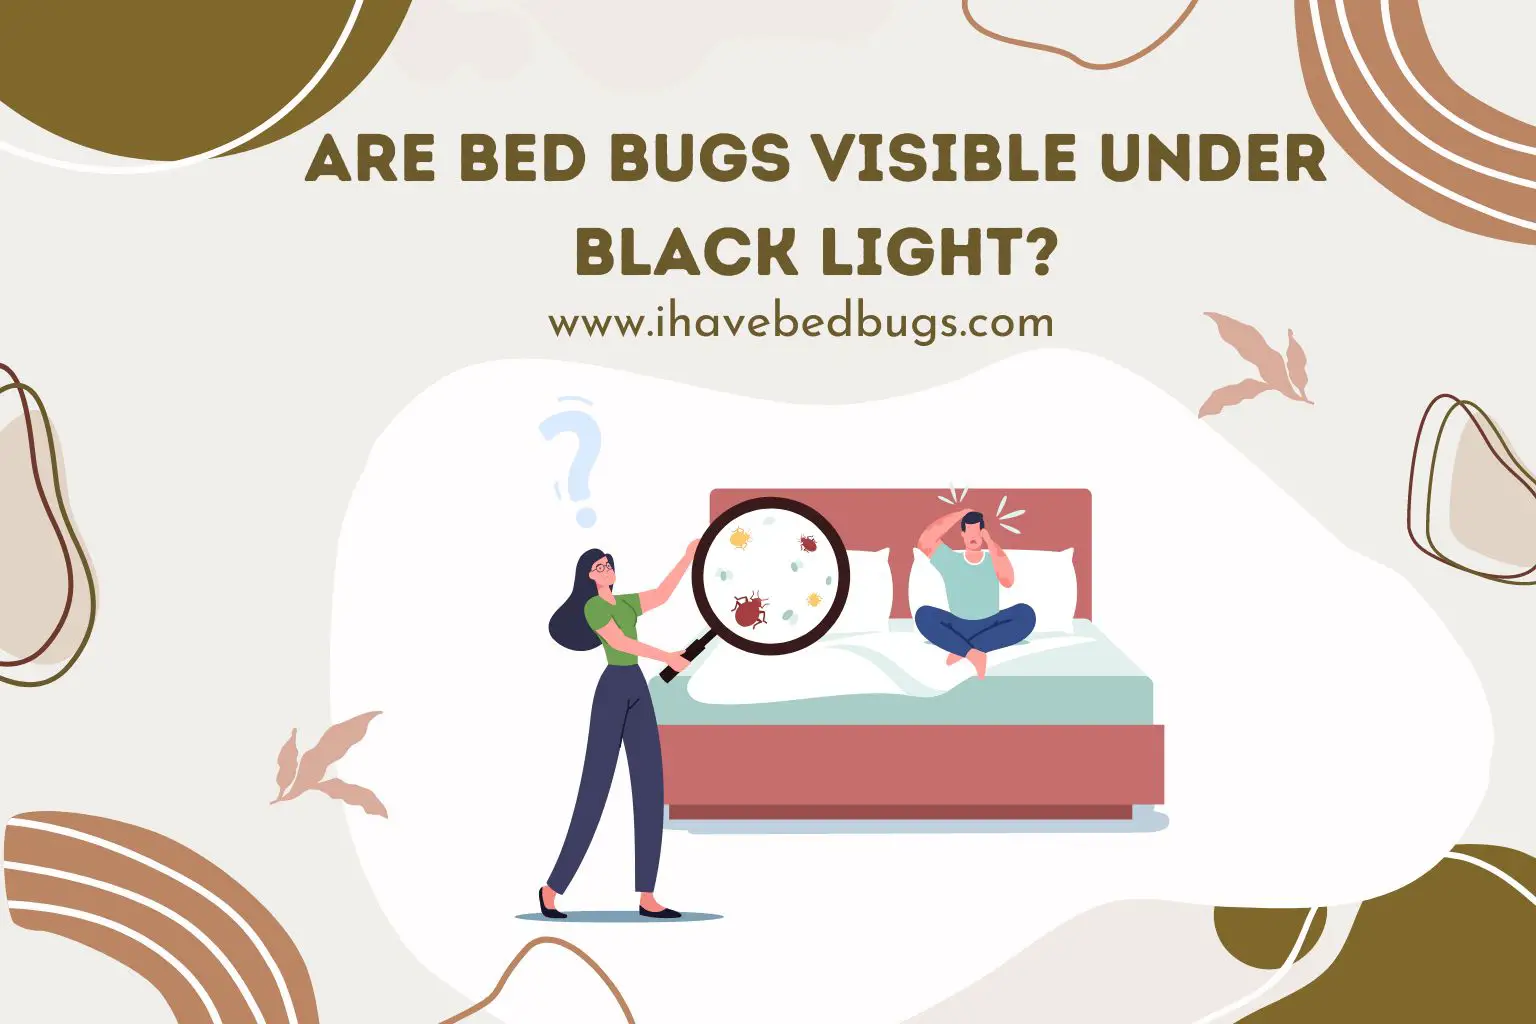 Are Bed Bugs Visible Under Black Light